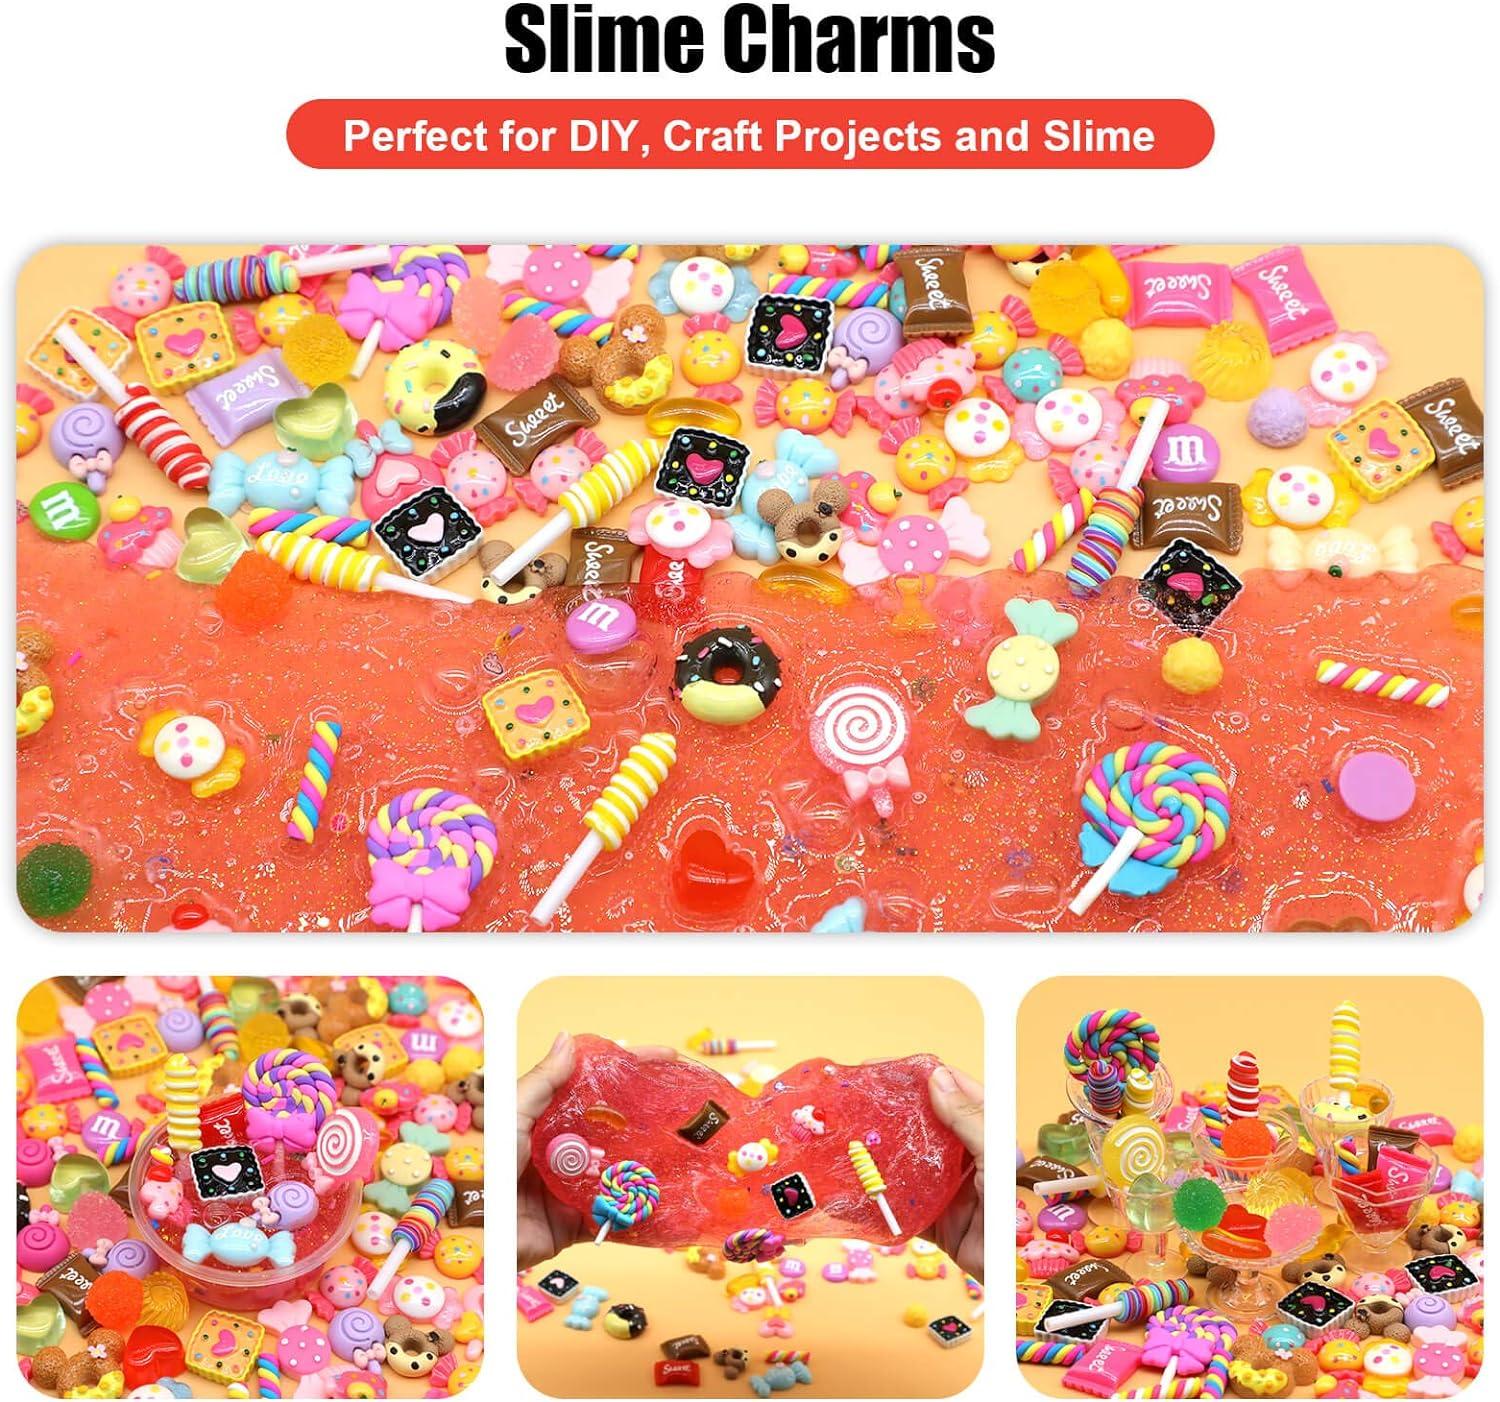  Gorvalin 105Pcs Kawaii Resin Charms, 3D Sweety Pink Flatback  Resins Candy Charms for Nail Art Valentine Crafts Decoration Slime Making  Ornament DIY Supplies for Craft Making : Arts, Crafts & Sewing